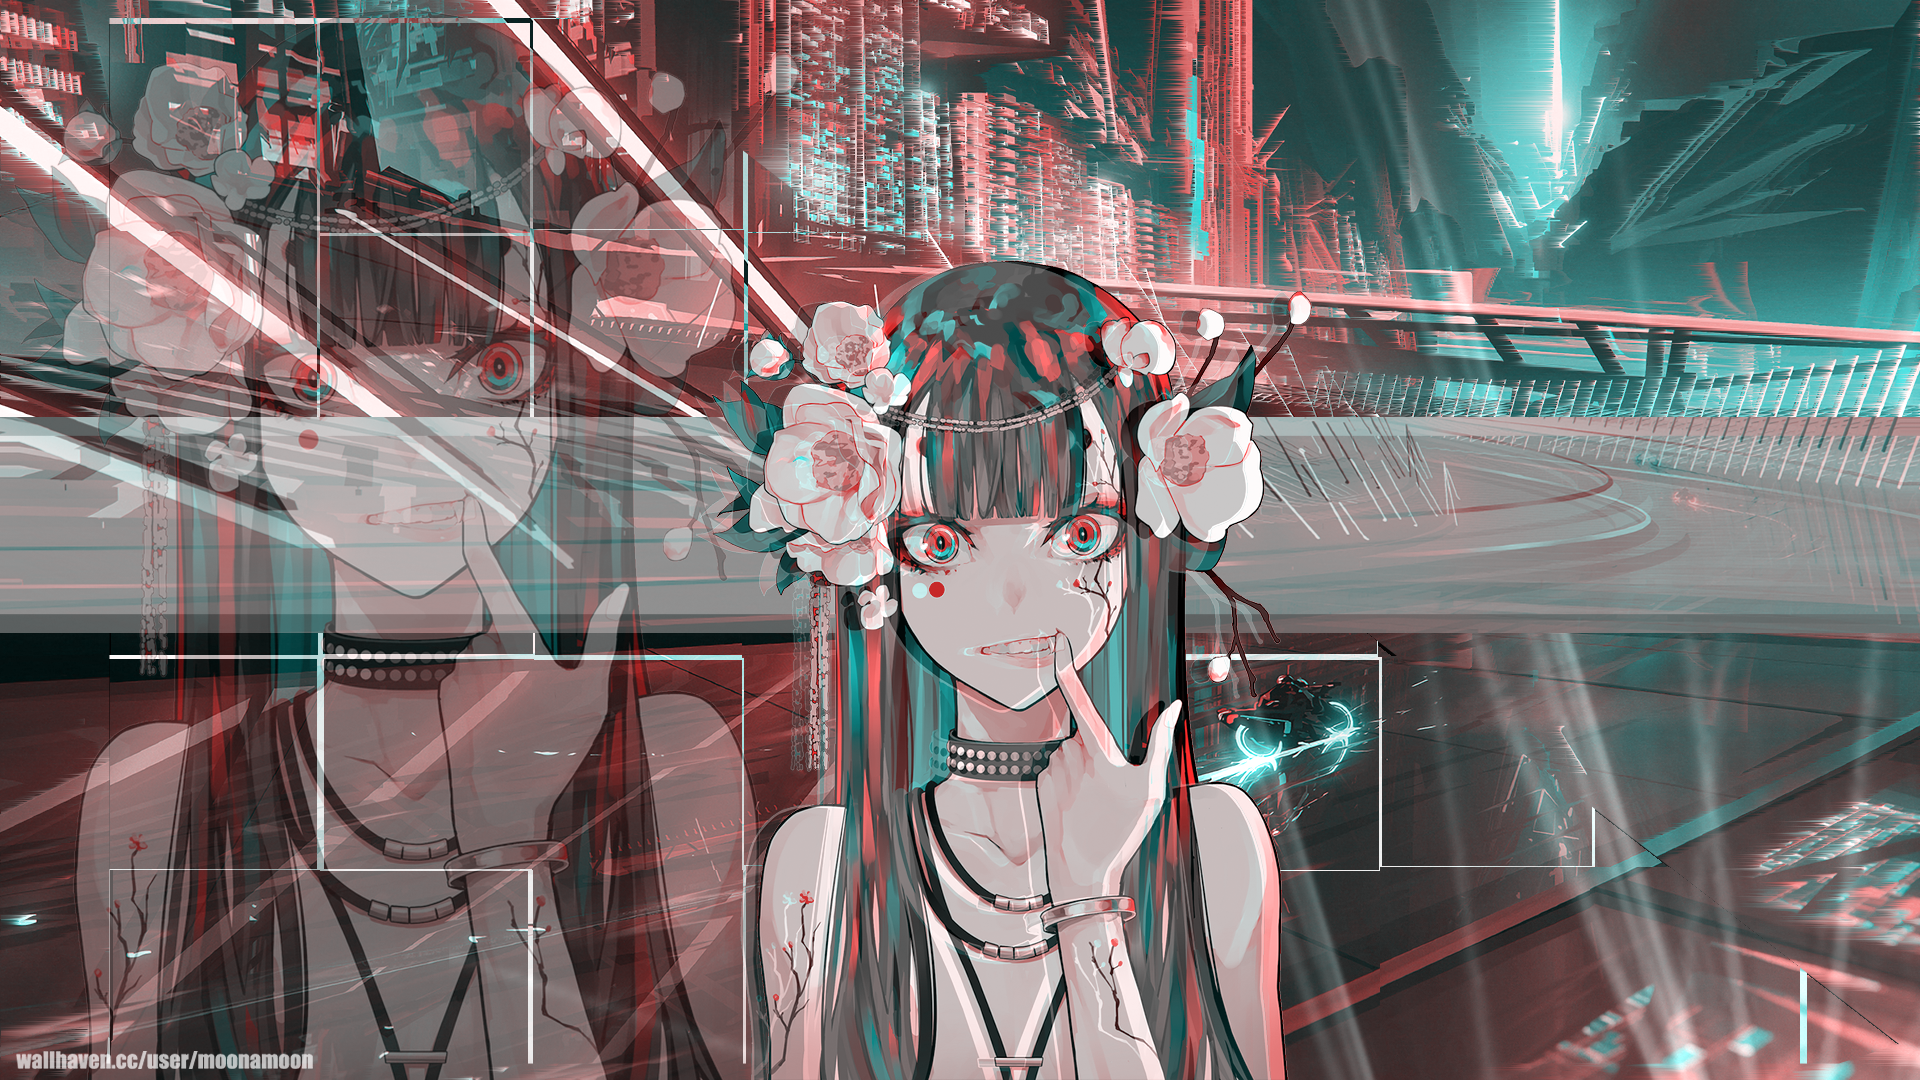 Wallpaper, anime girls, cyberpunk, futuristic, red eyes, looking at viewer, city, neon 1920x1080